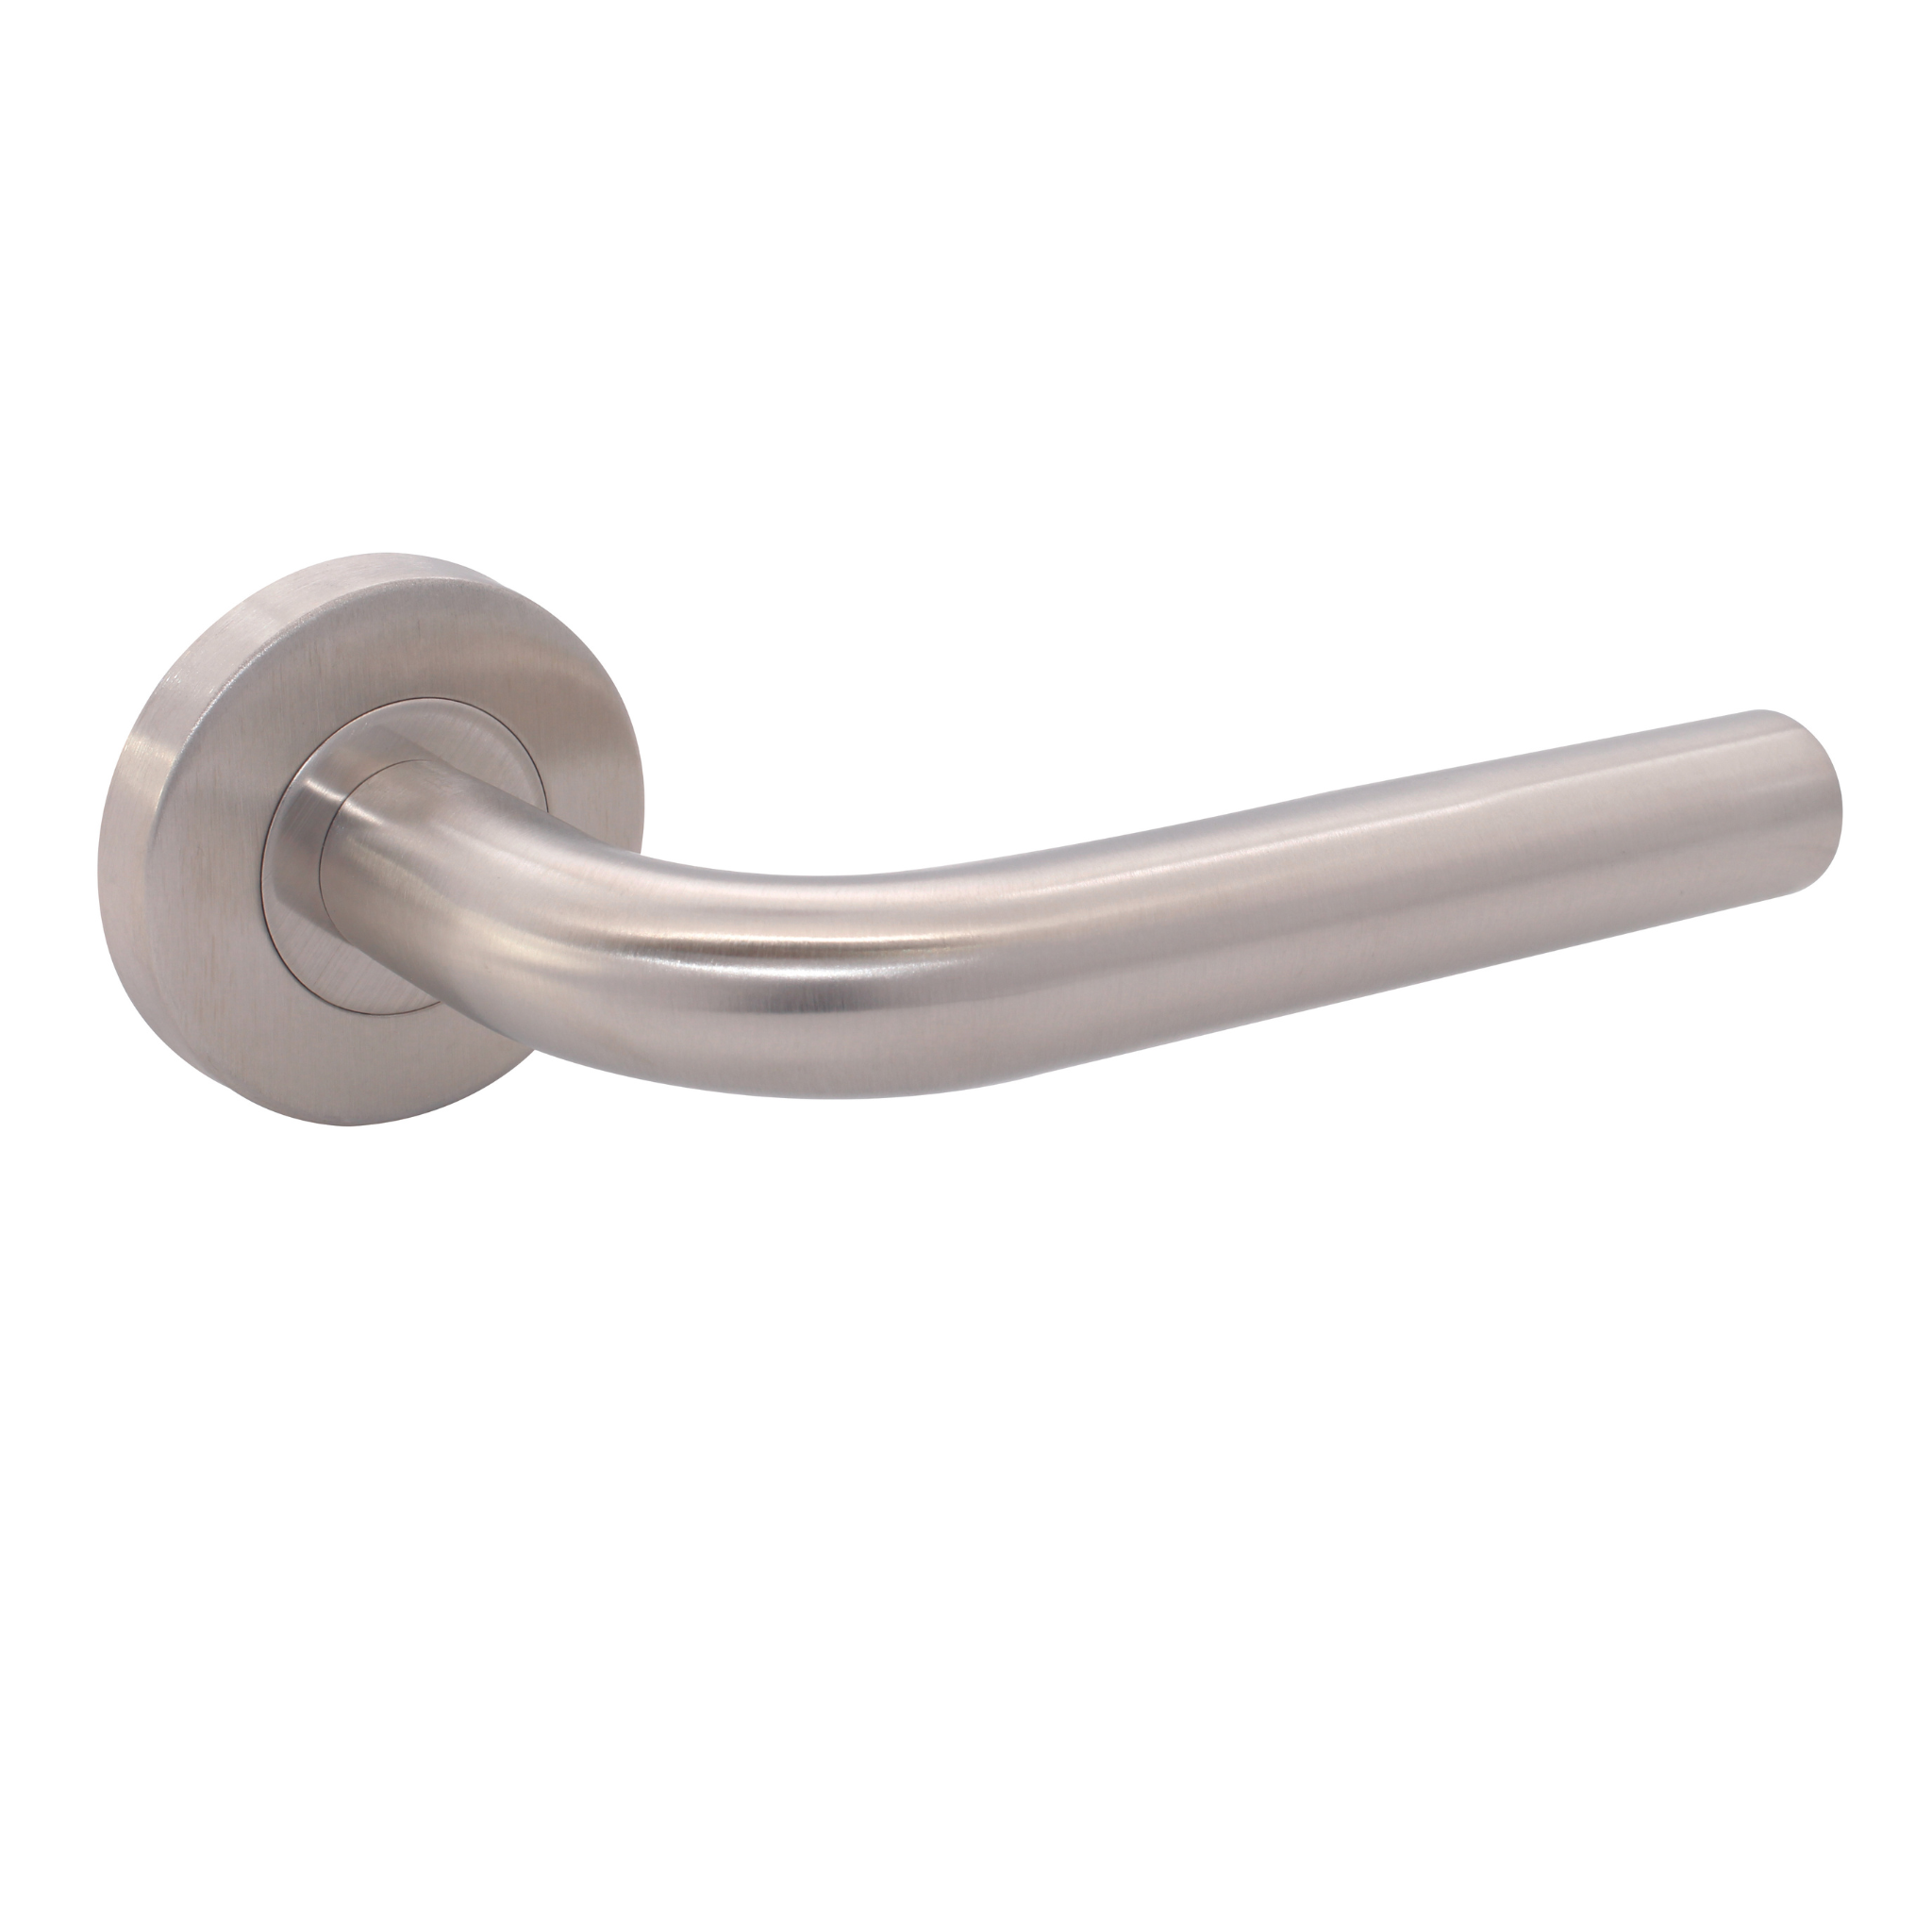 FT01.R._.SS, Lever Handles, Tubular, On Round Rose, With Escutcheons, 134mm (l), Stainless Steel, CISA